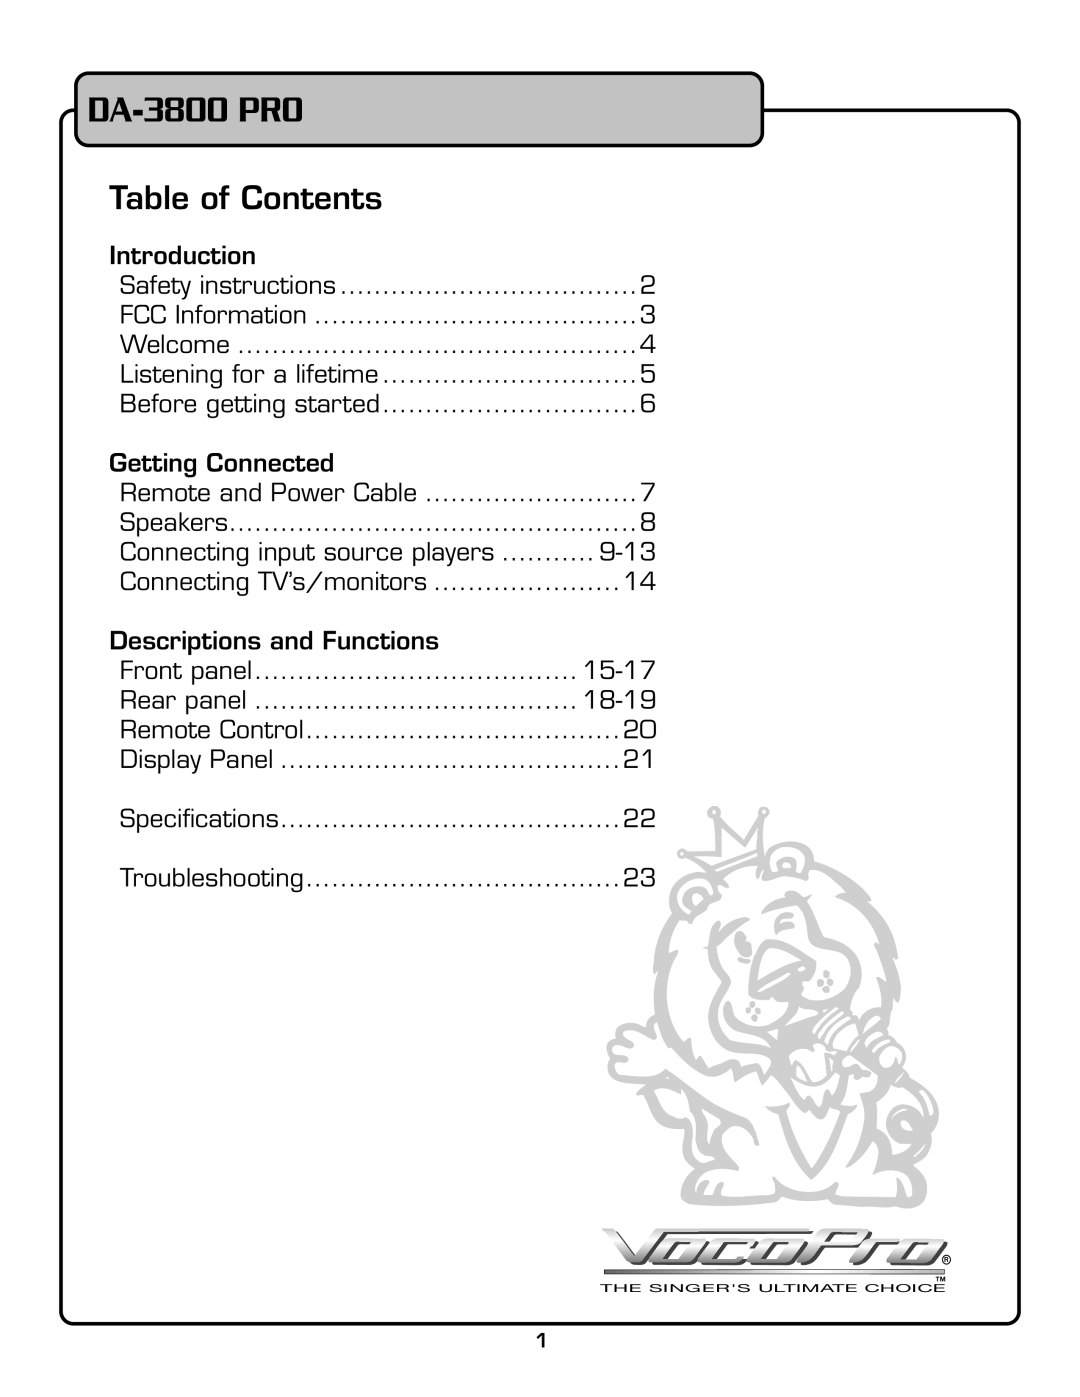 VocoPro DA-3800 PRO owner manual Table of Contents 